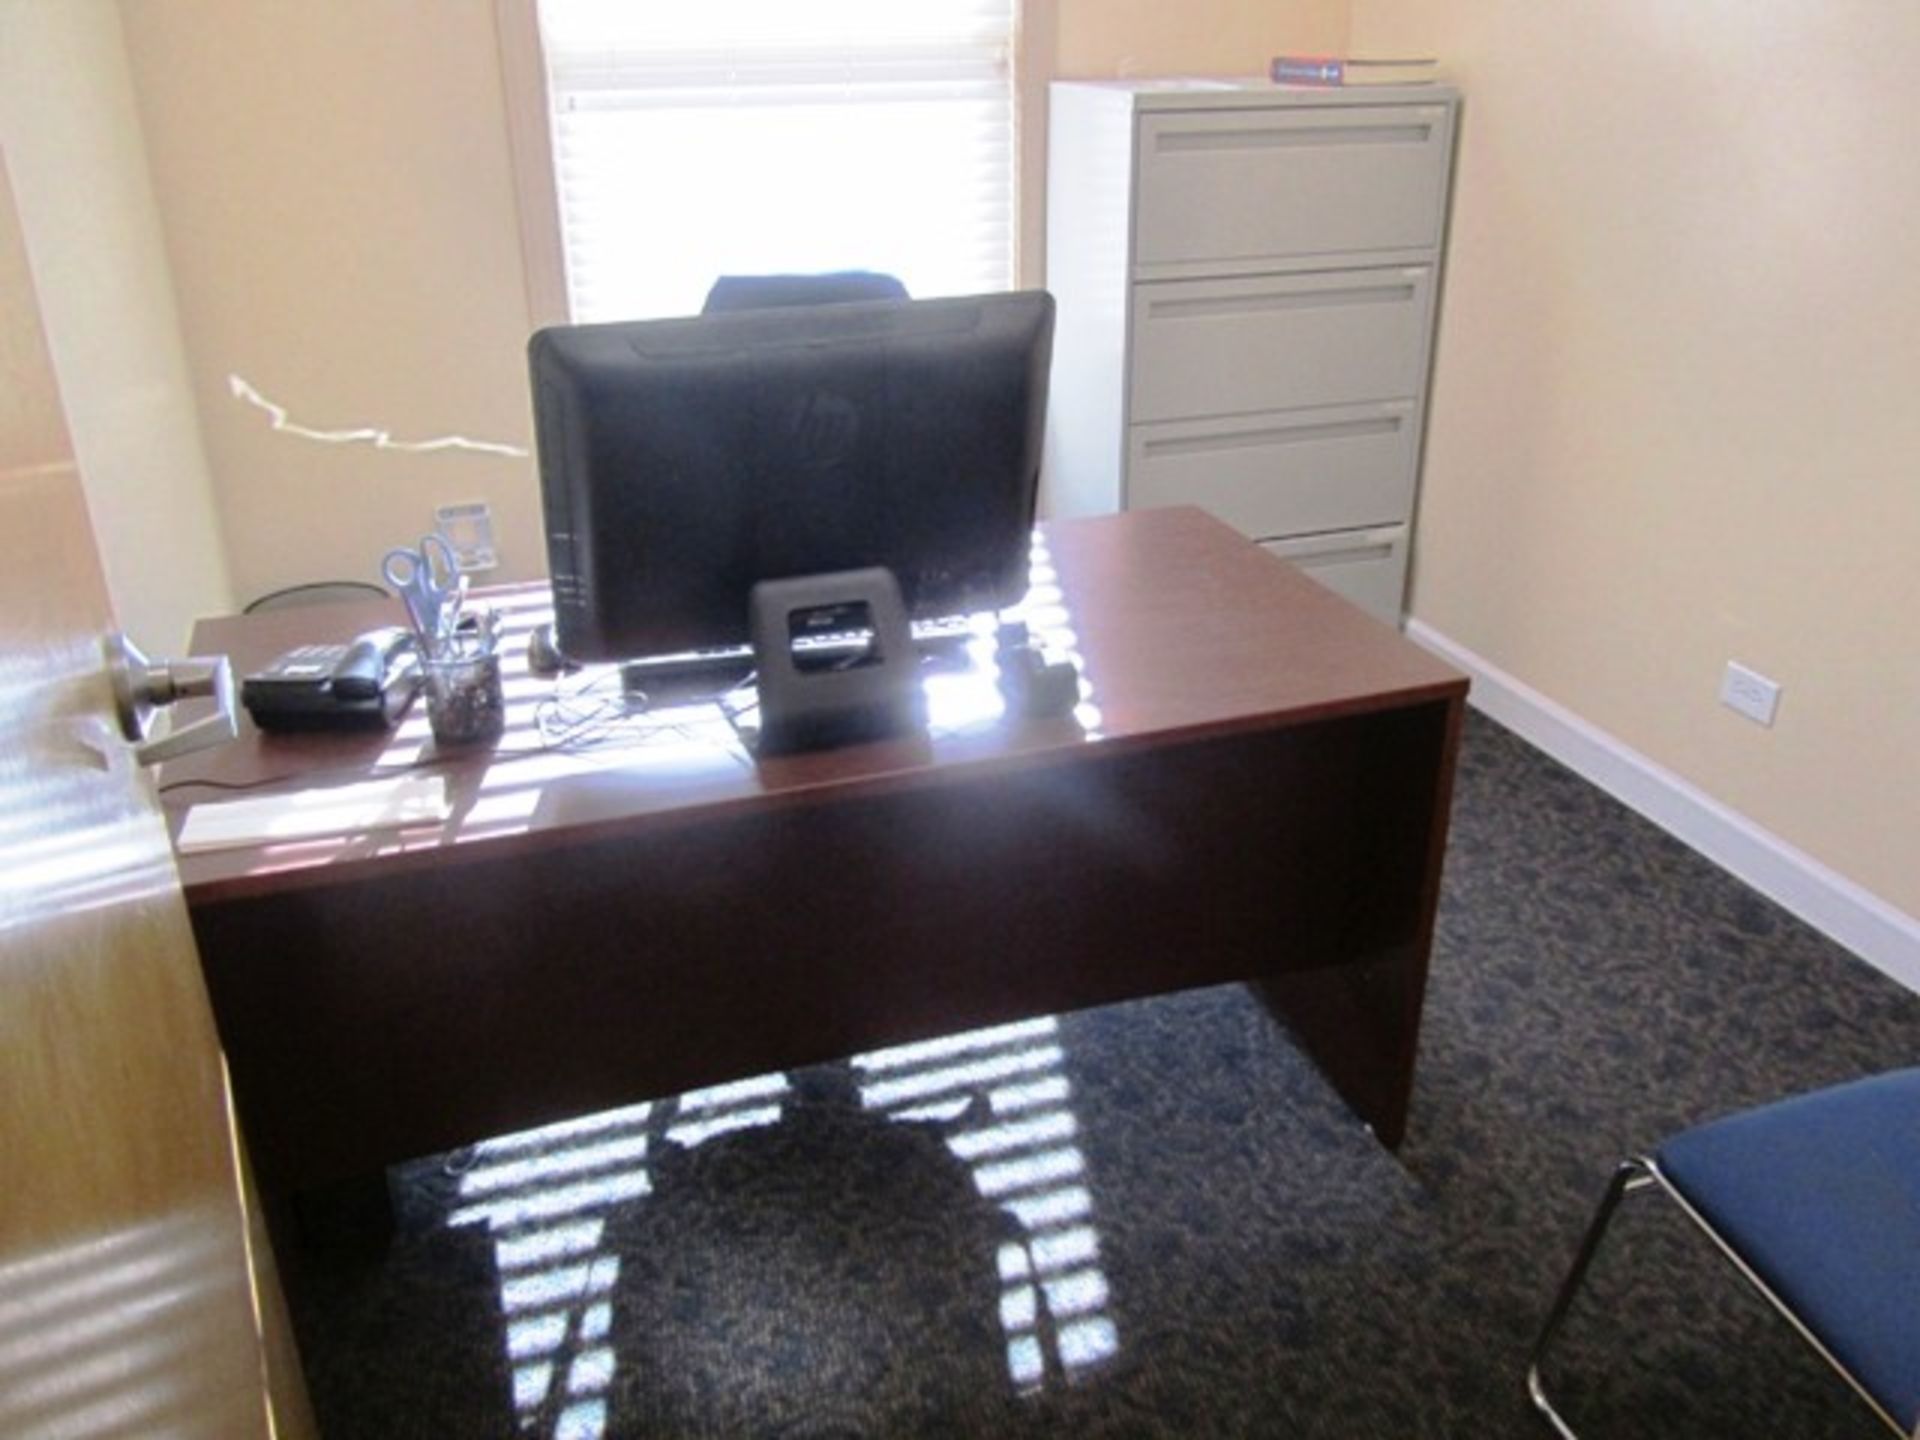 Contents of Office consisting of Desk, Chairs, Filing Cabinet, *located in Orland Park, IL